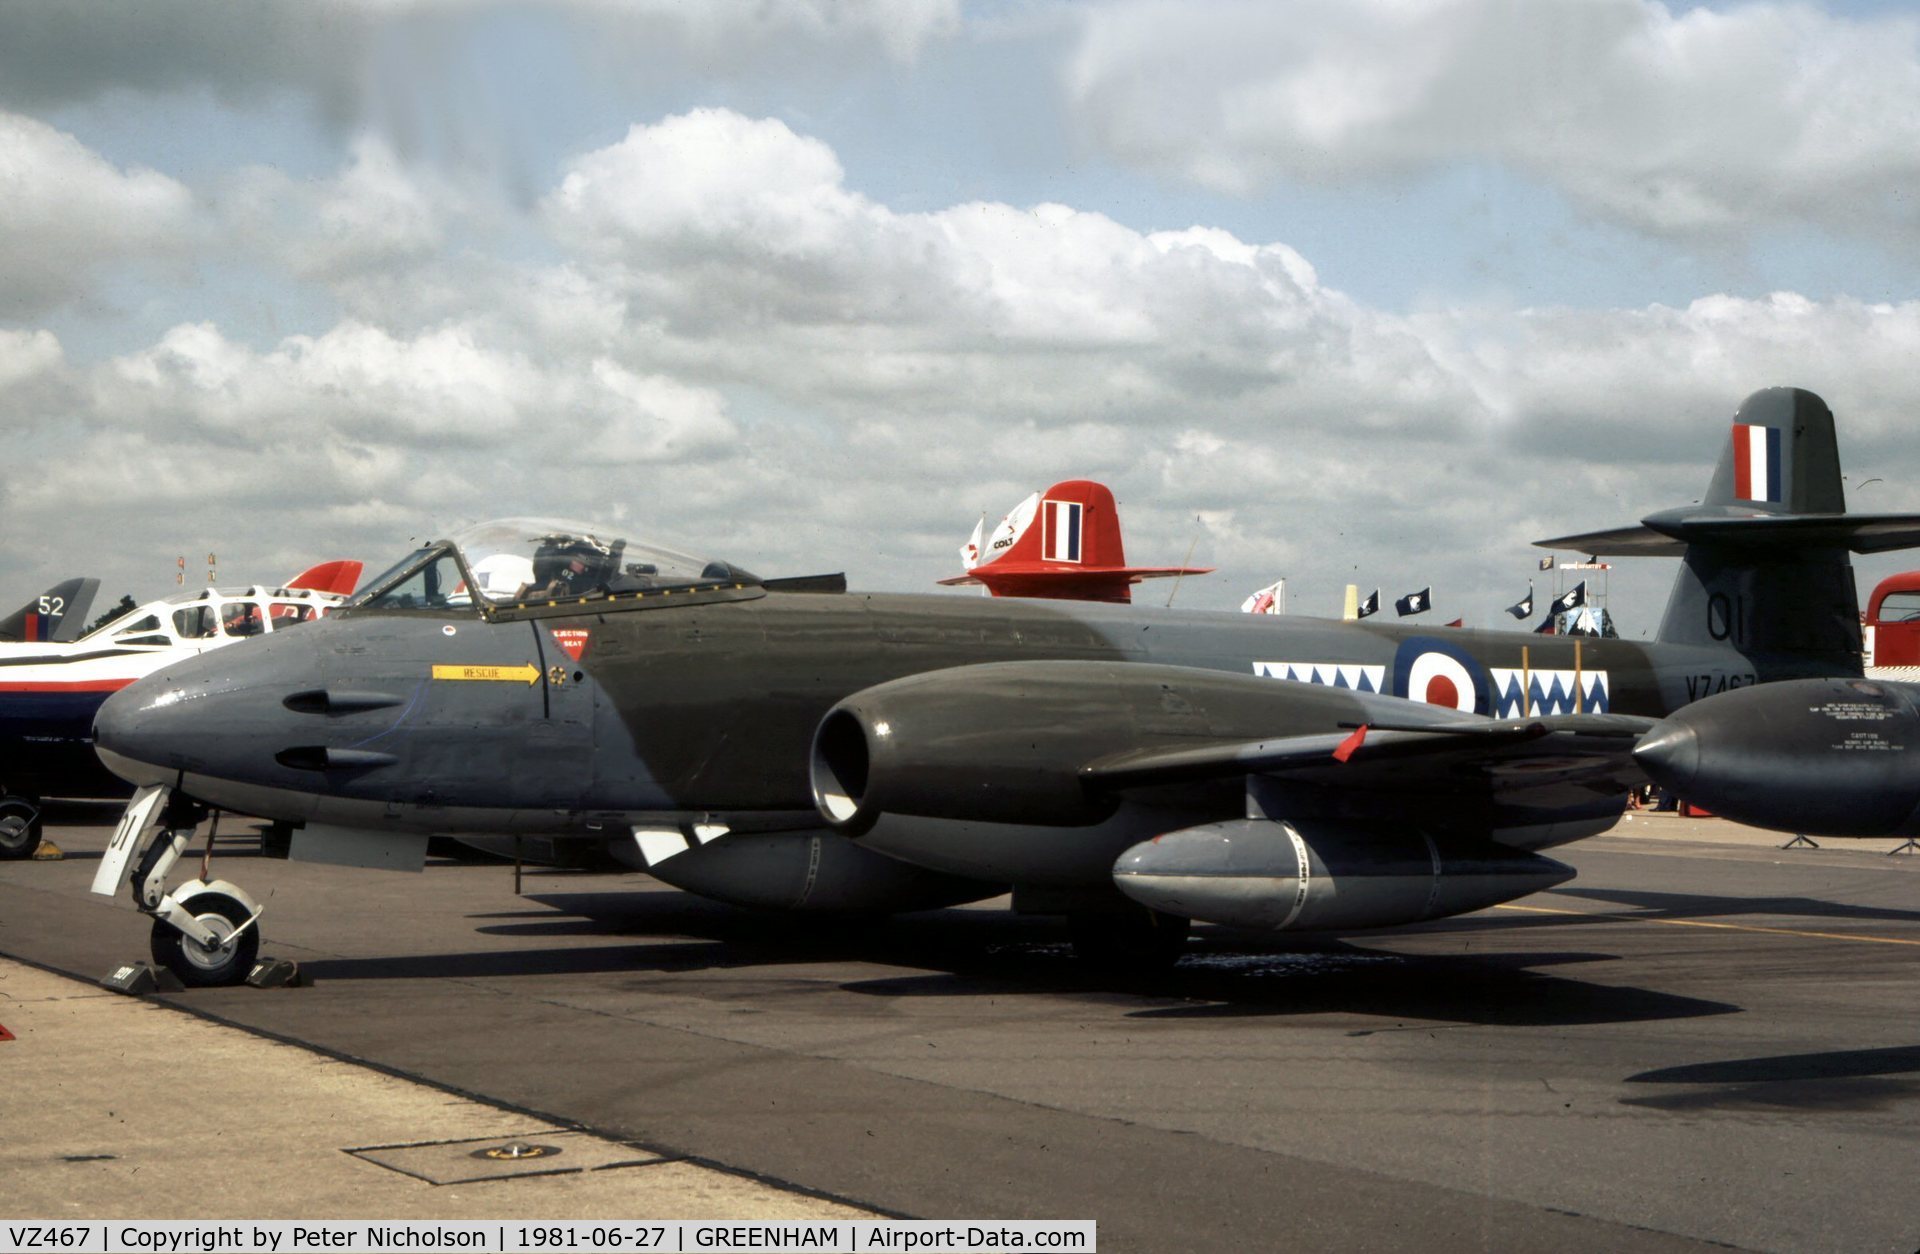 VZ467, 1950 Gloster Meteor F.8 C/N G5/361641, Meteor F.8(TT) of 1 Tactical Weapons Unit on display at the 1981 Intnl Air Tattoo at RAF Greenham Common.